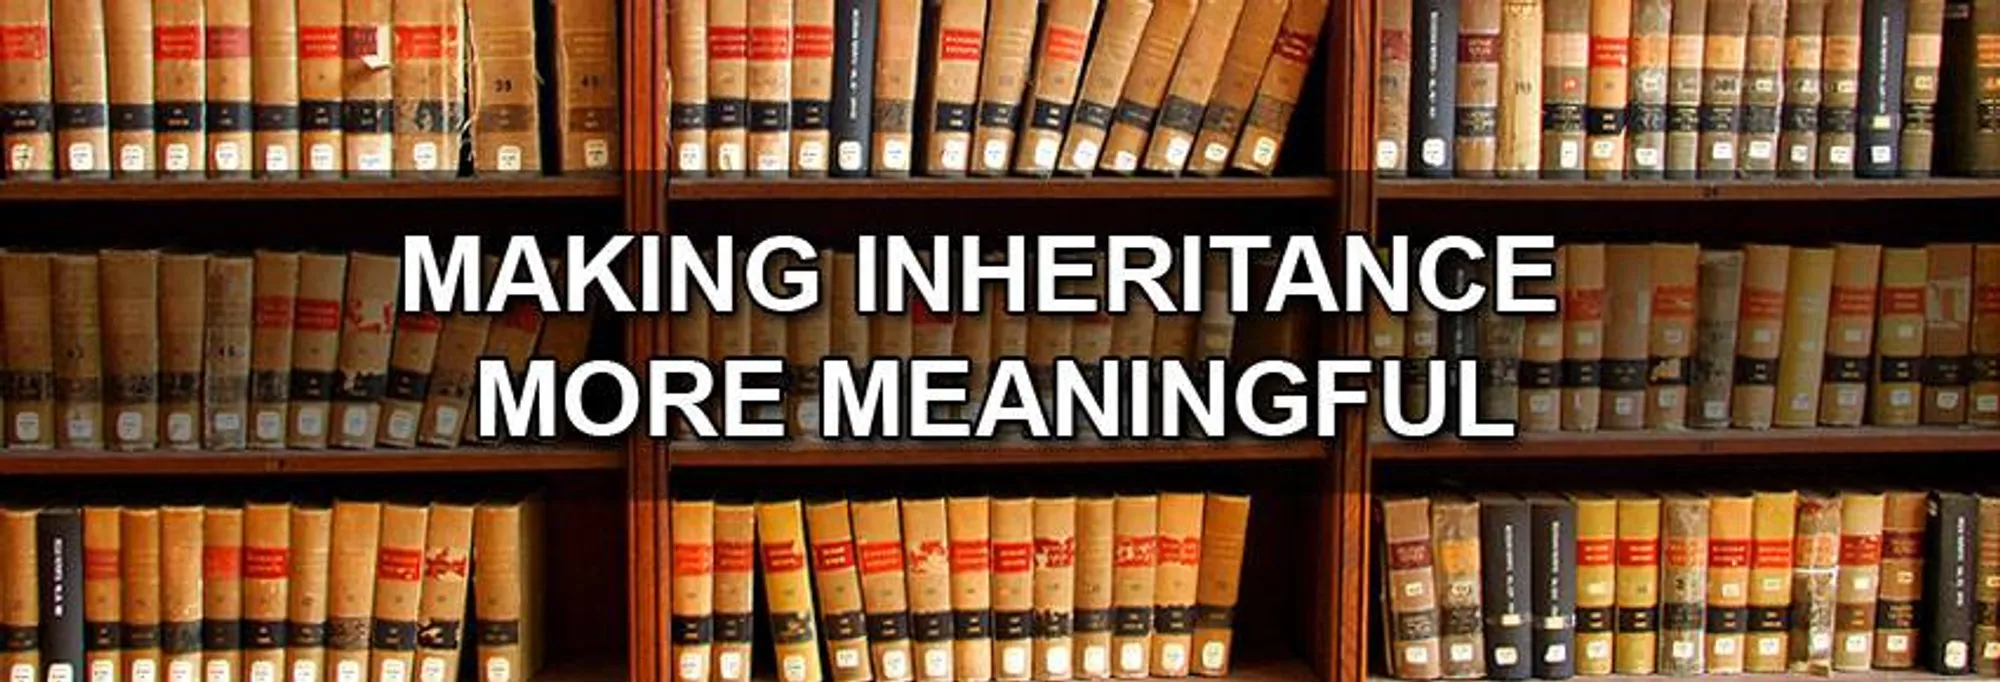 Succession Certificate: Making Inheritance More Meaningful